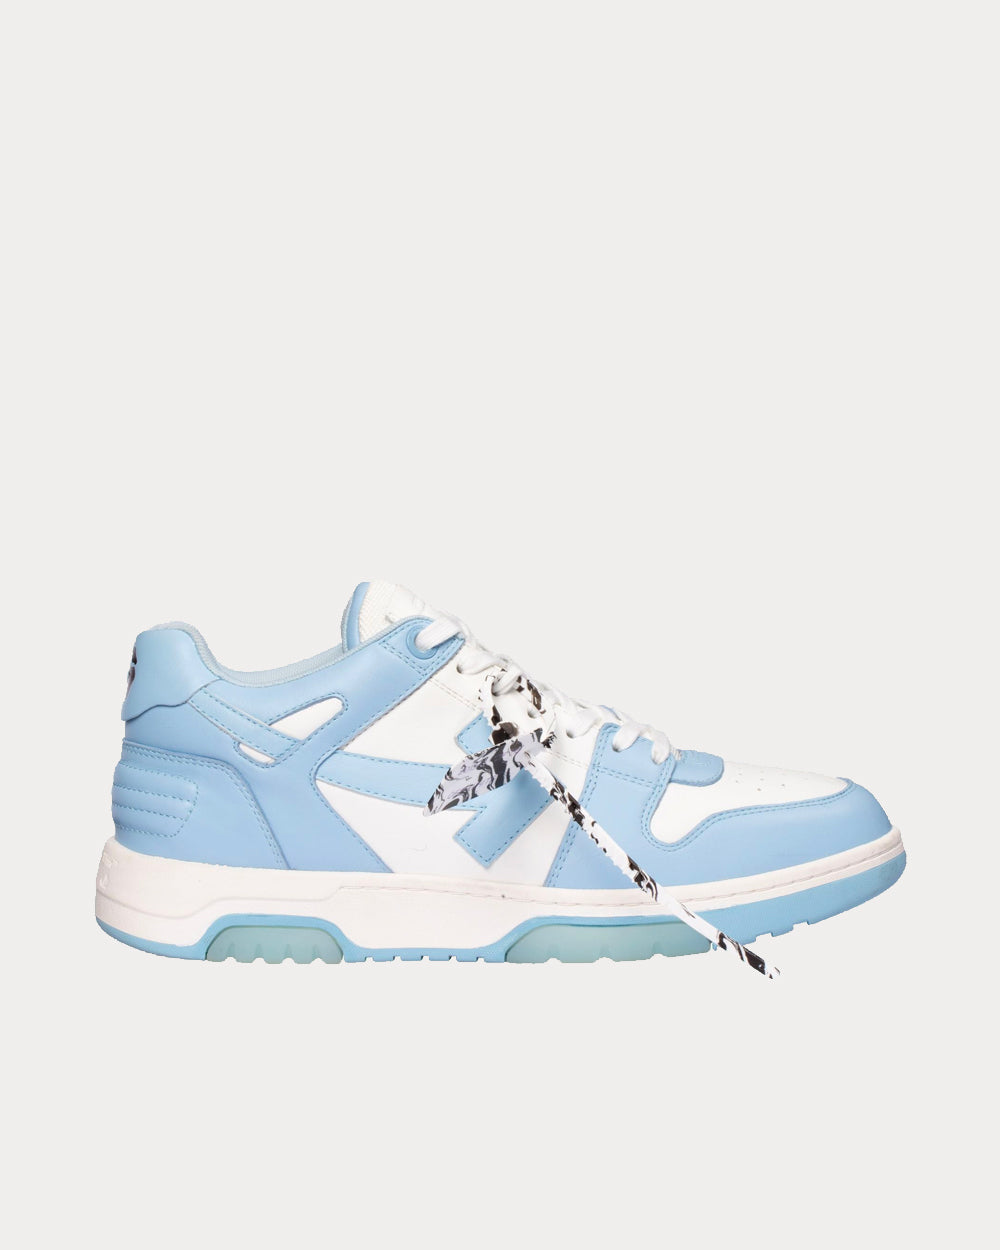 Meyella stenografi søskende Off-White Out Of Office "OOO" White Light Blue Low Top Sneakers - Sneak in  Peace